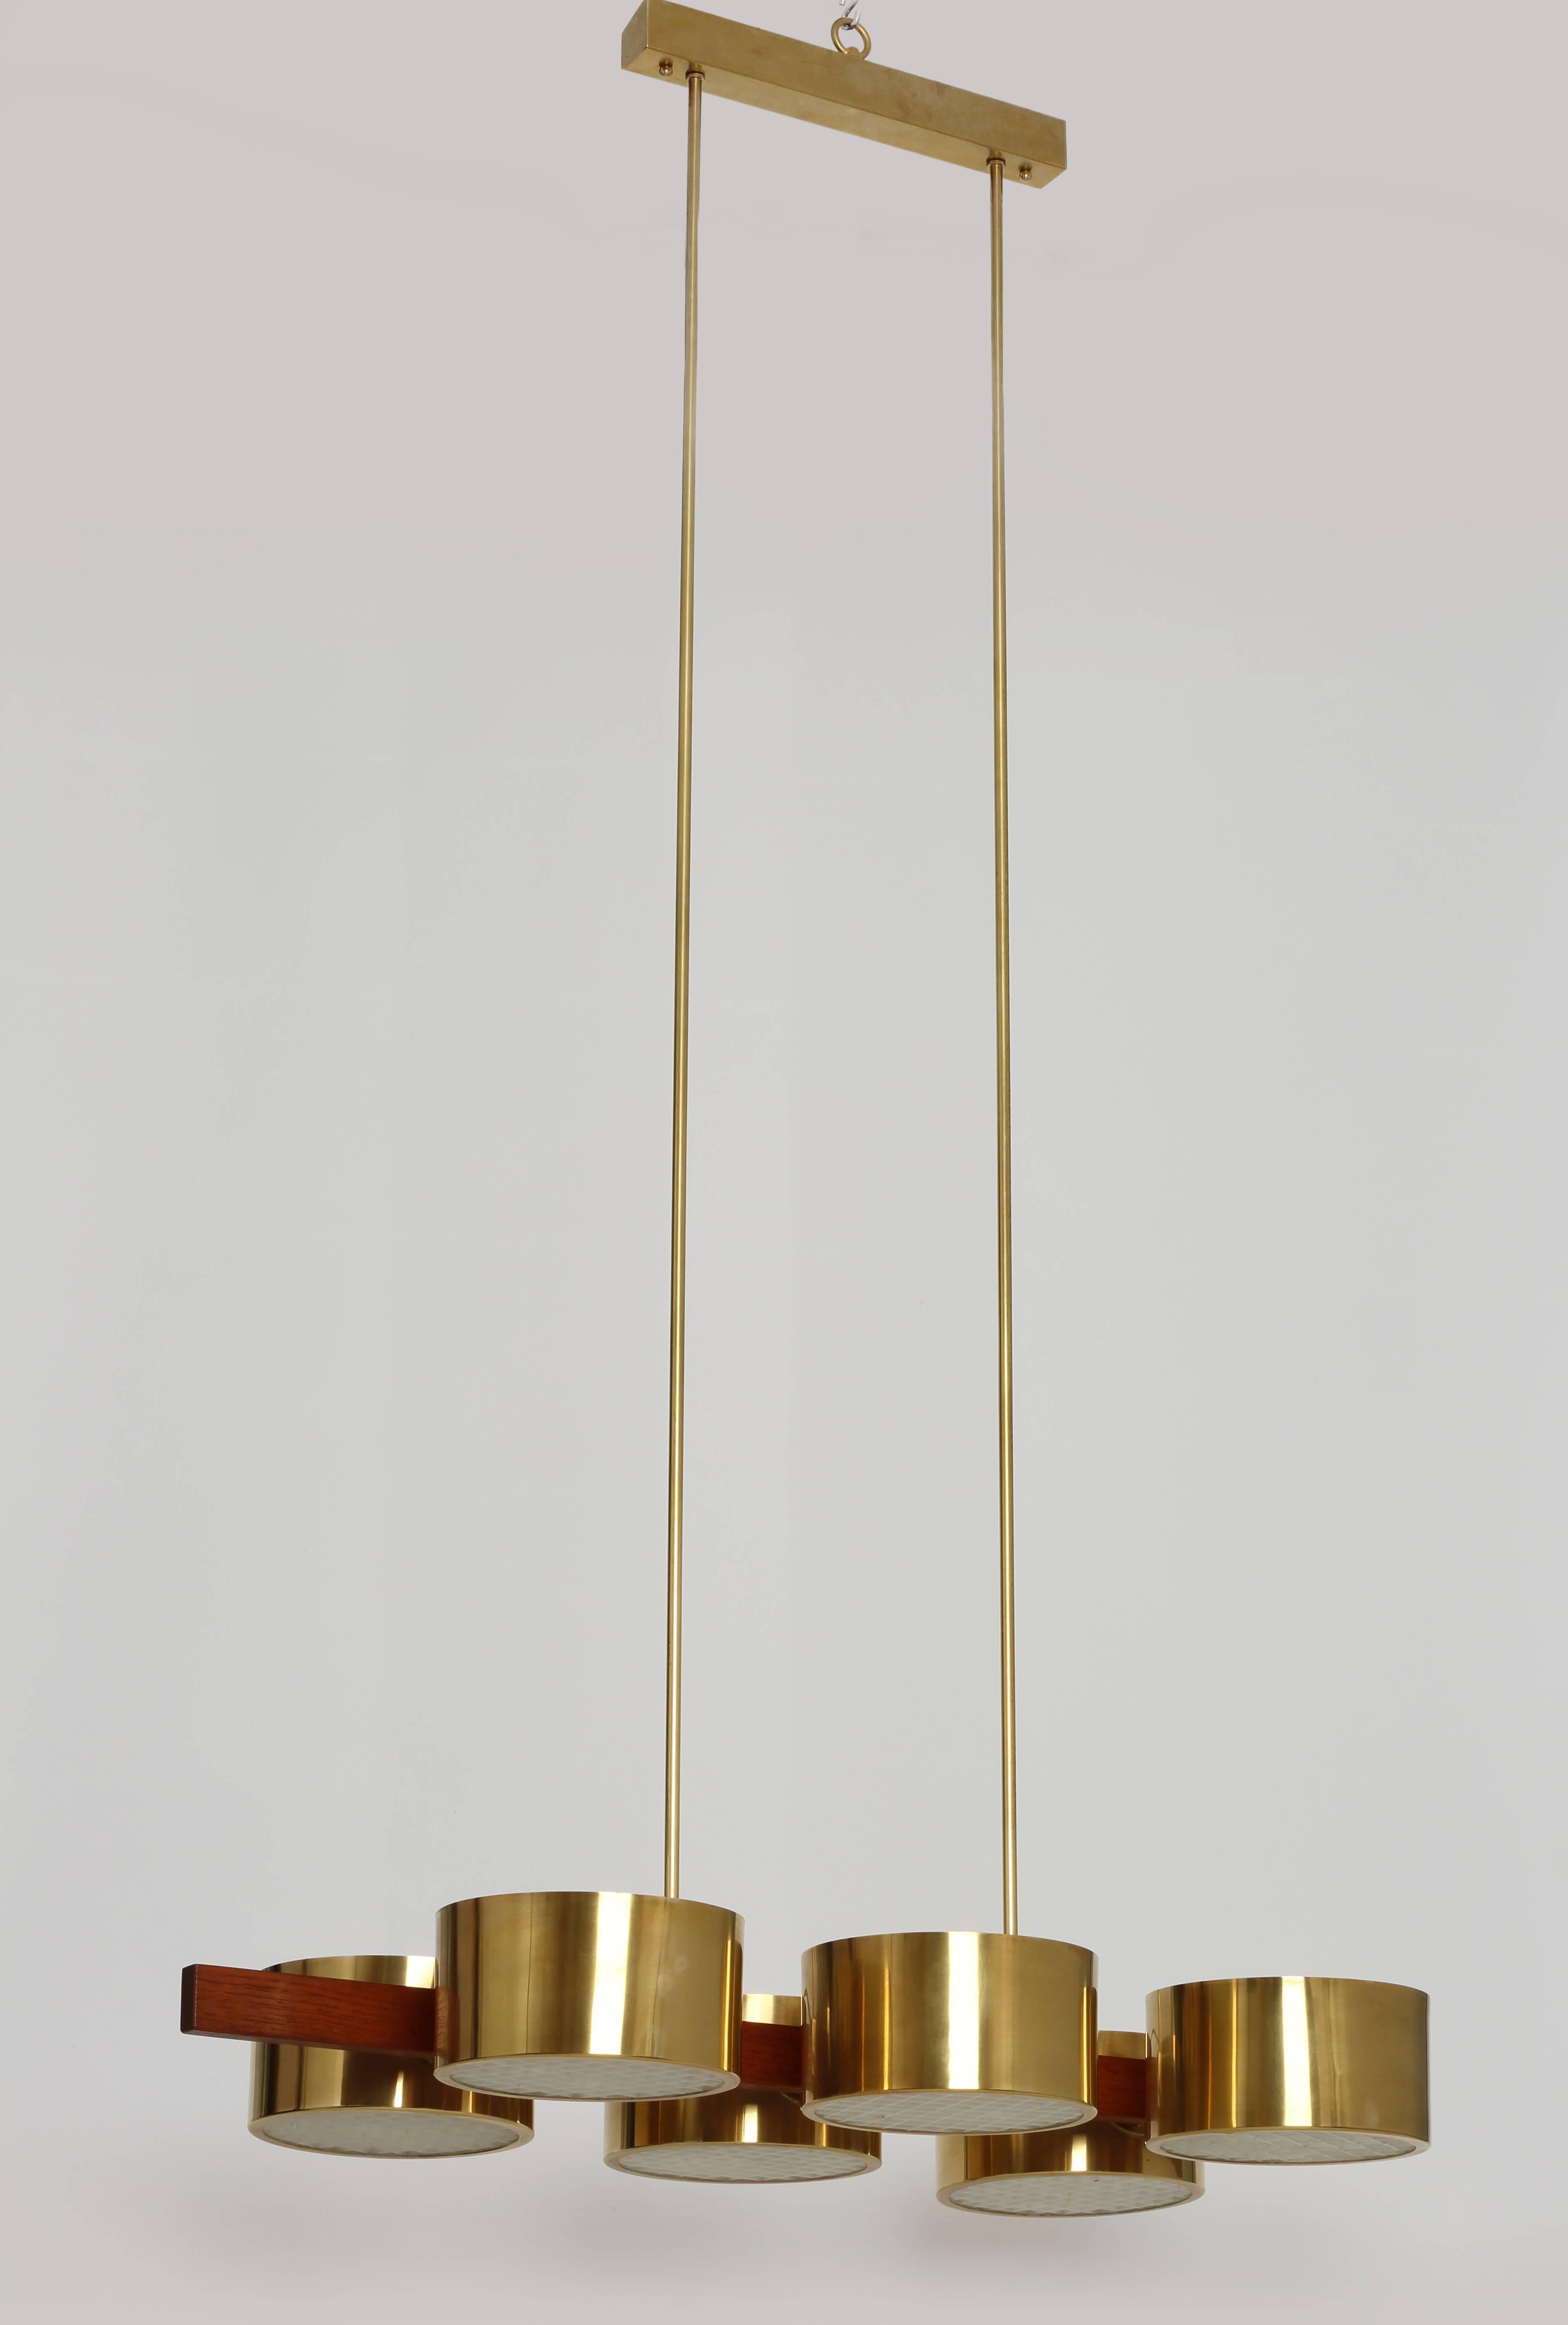 Hans Agne Jakobsson ceiling light. Made of brass and teak with acrylic diffusers.
Label 